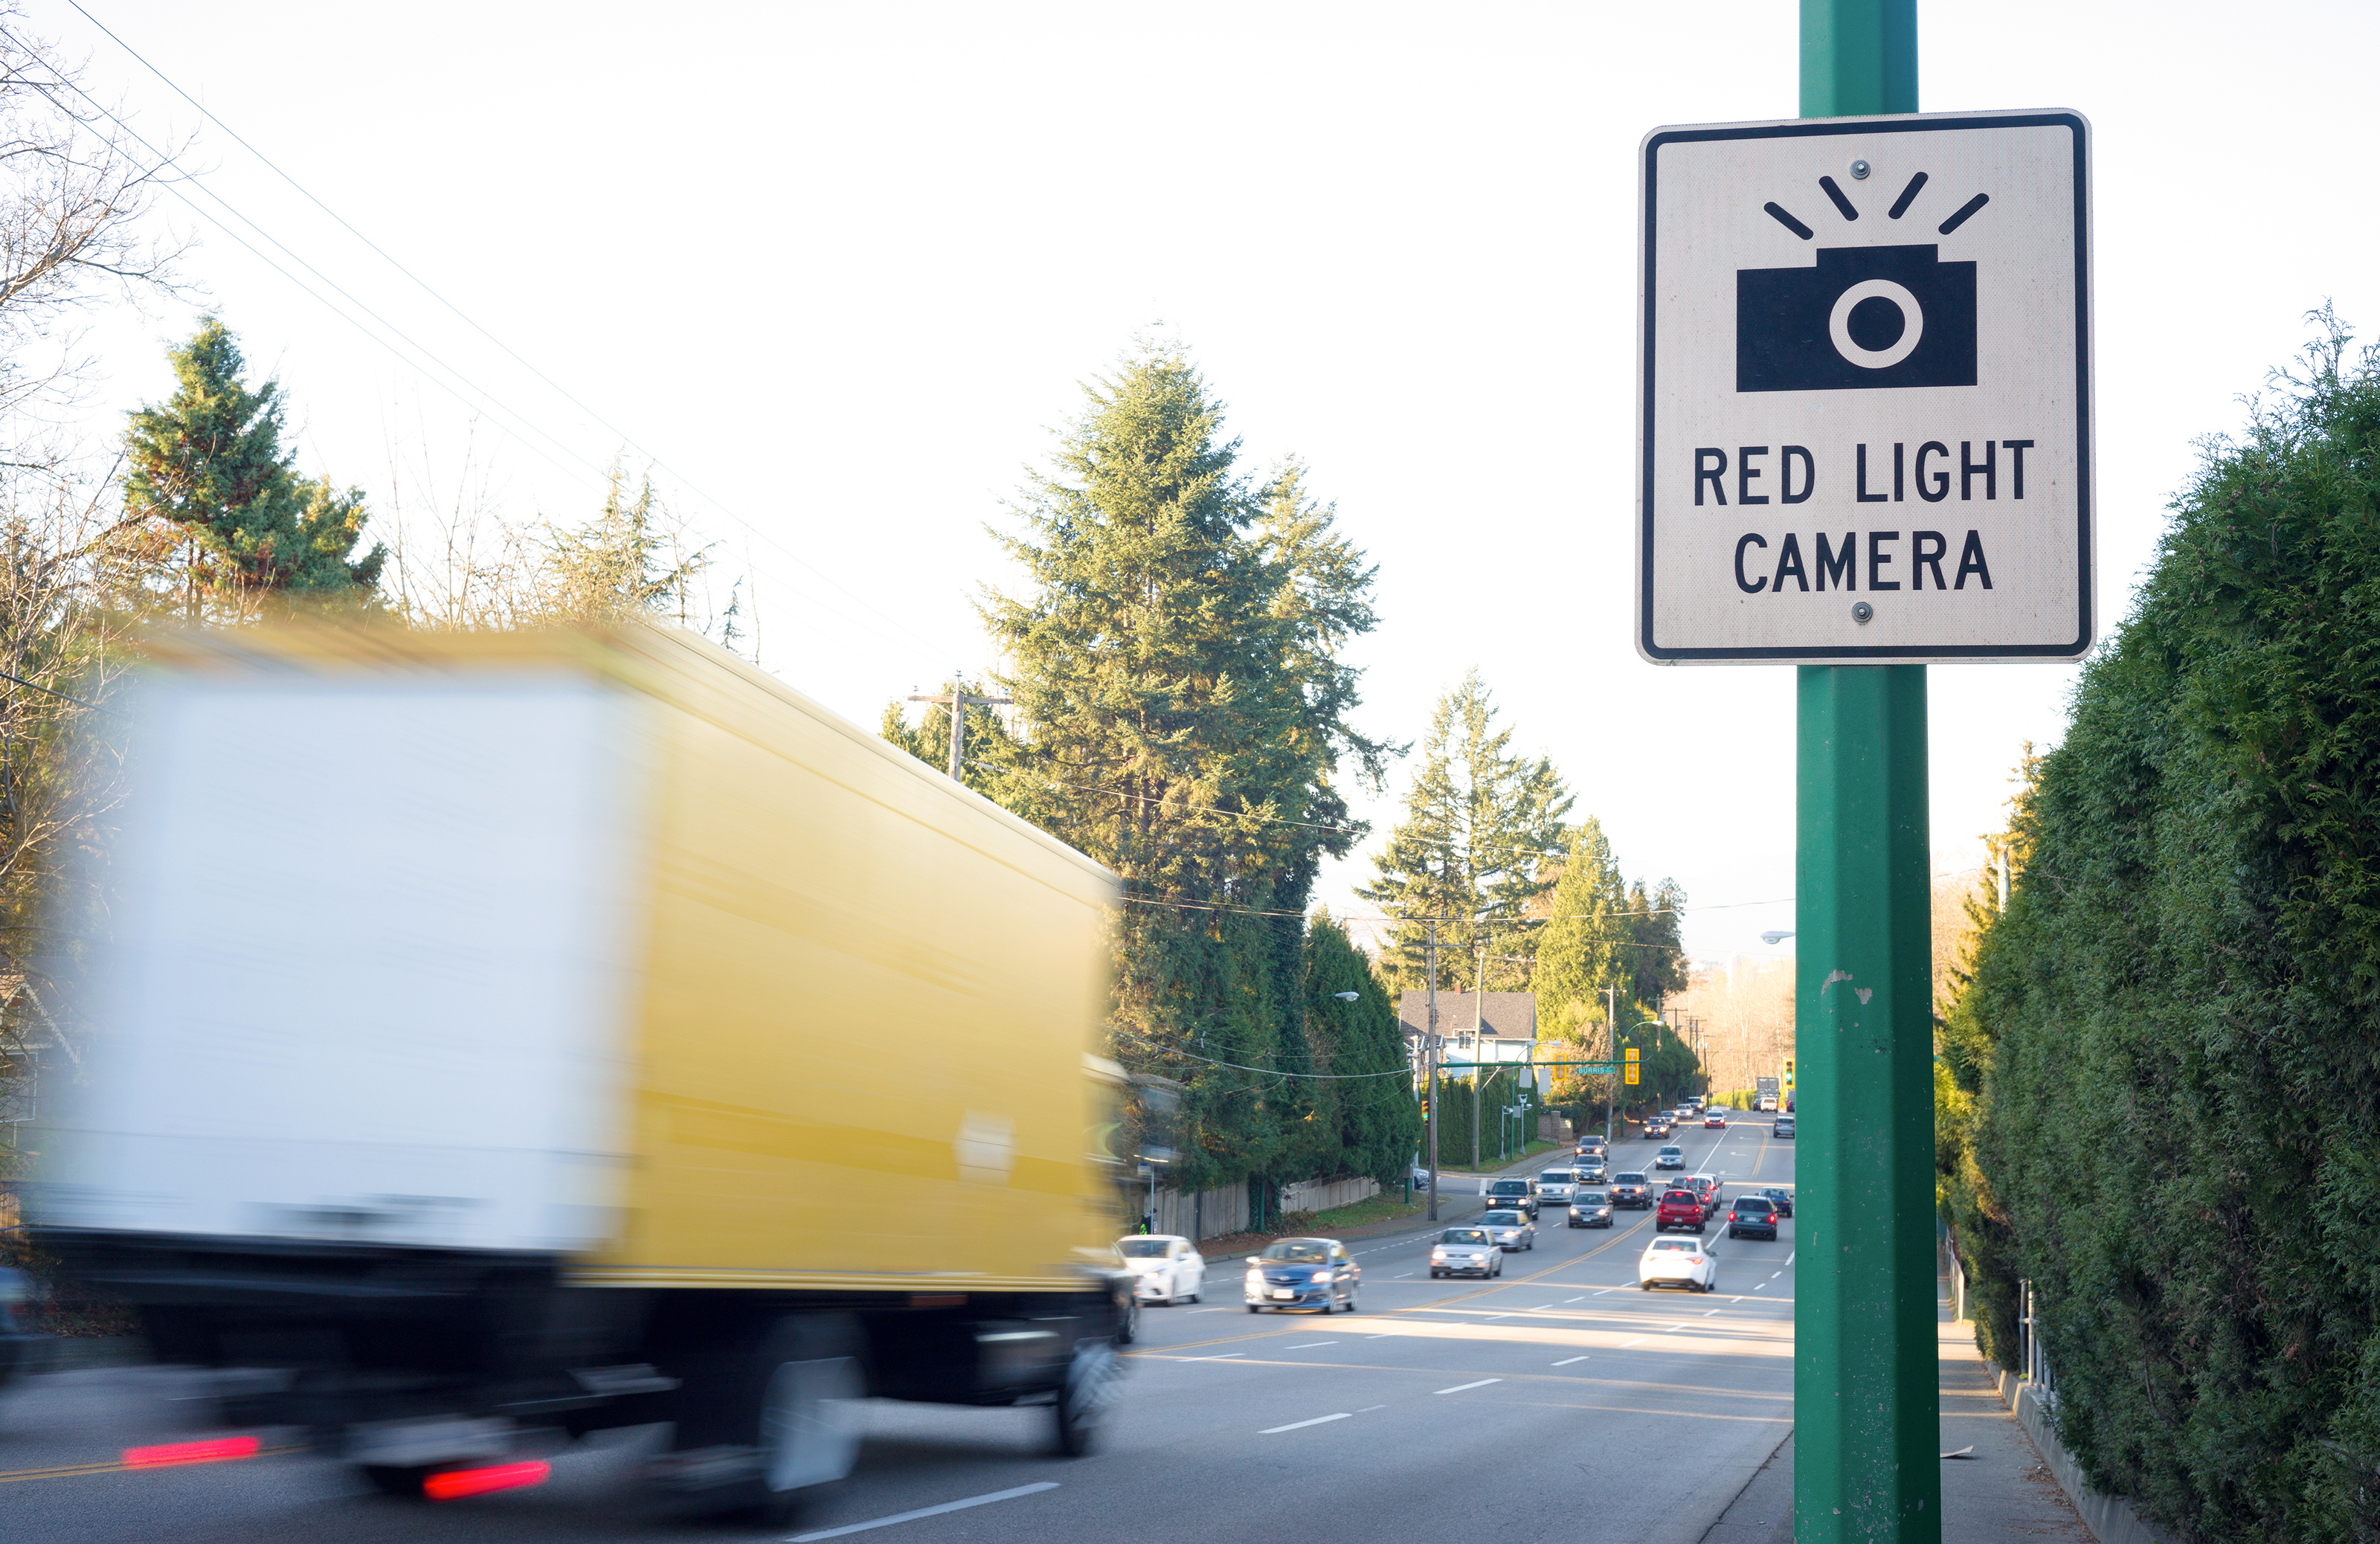 How Do I Handle a Red Light Camera Ticket if I Was Not the Driver?